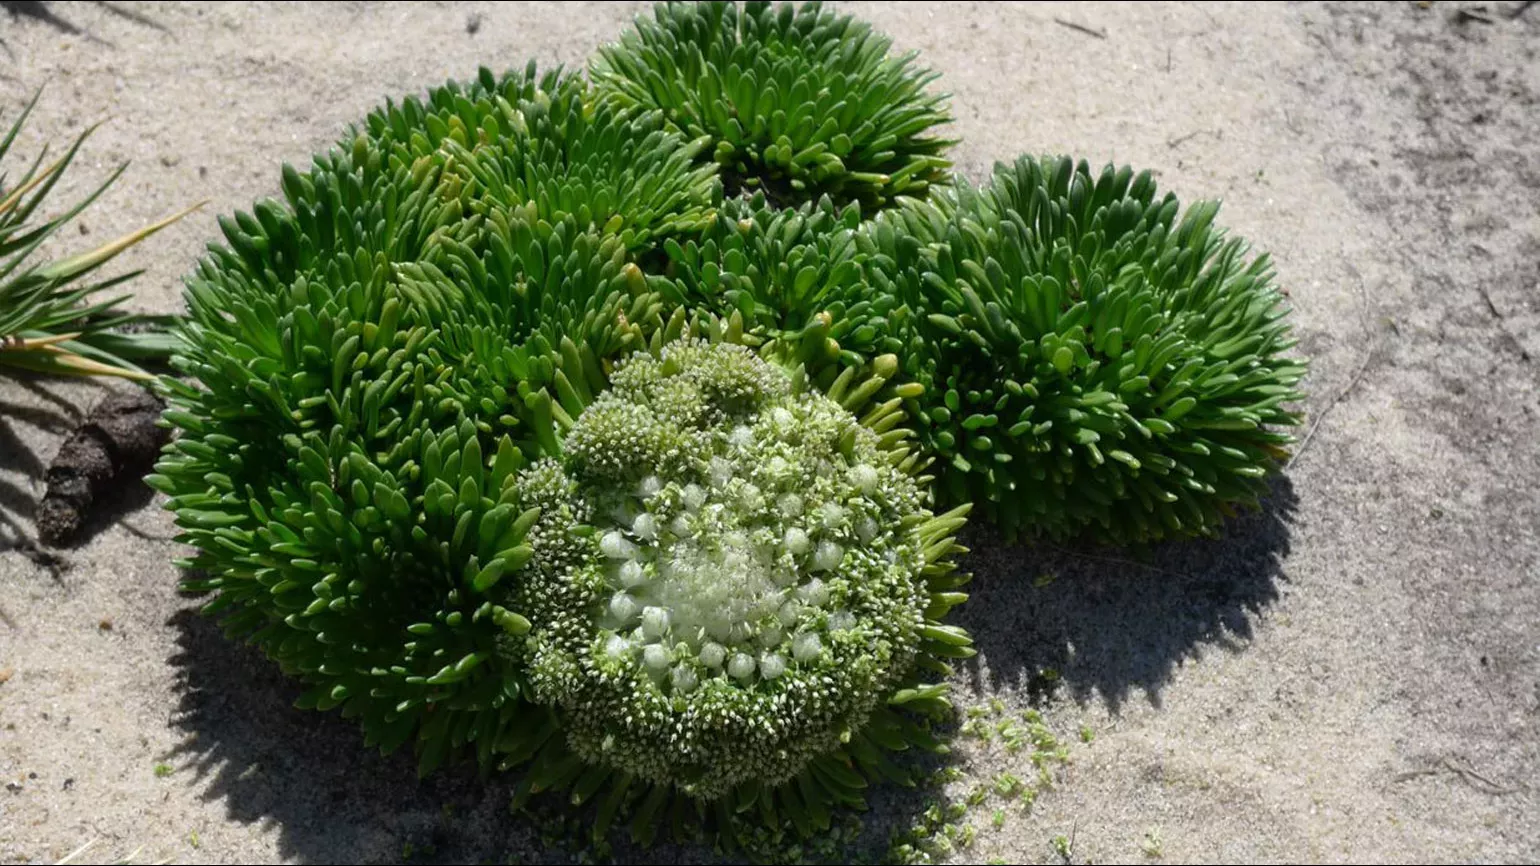 Four round green clusters